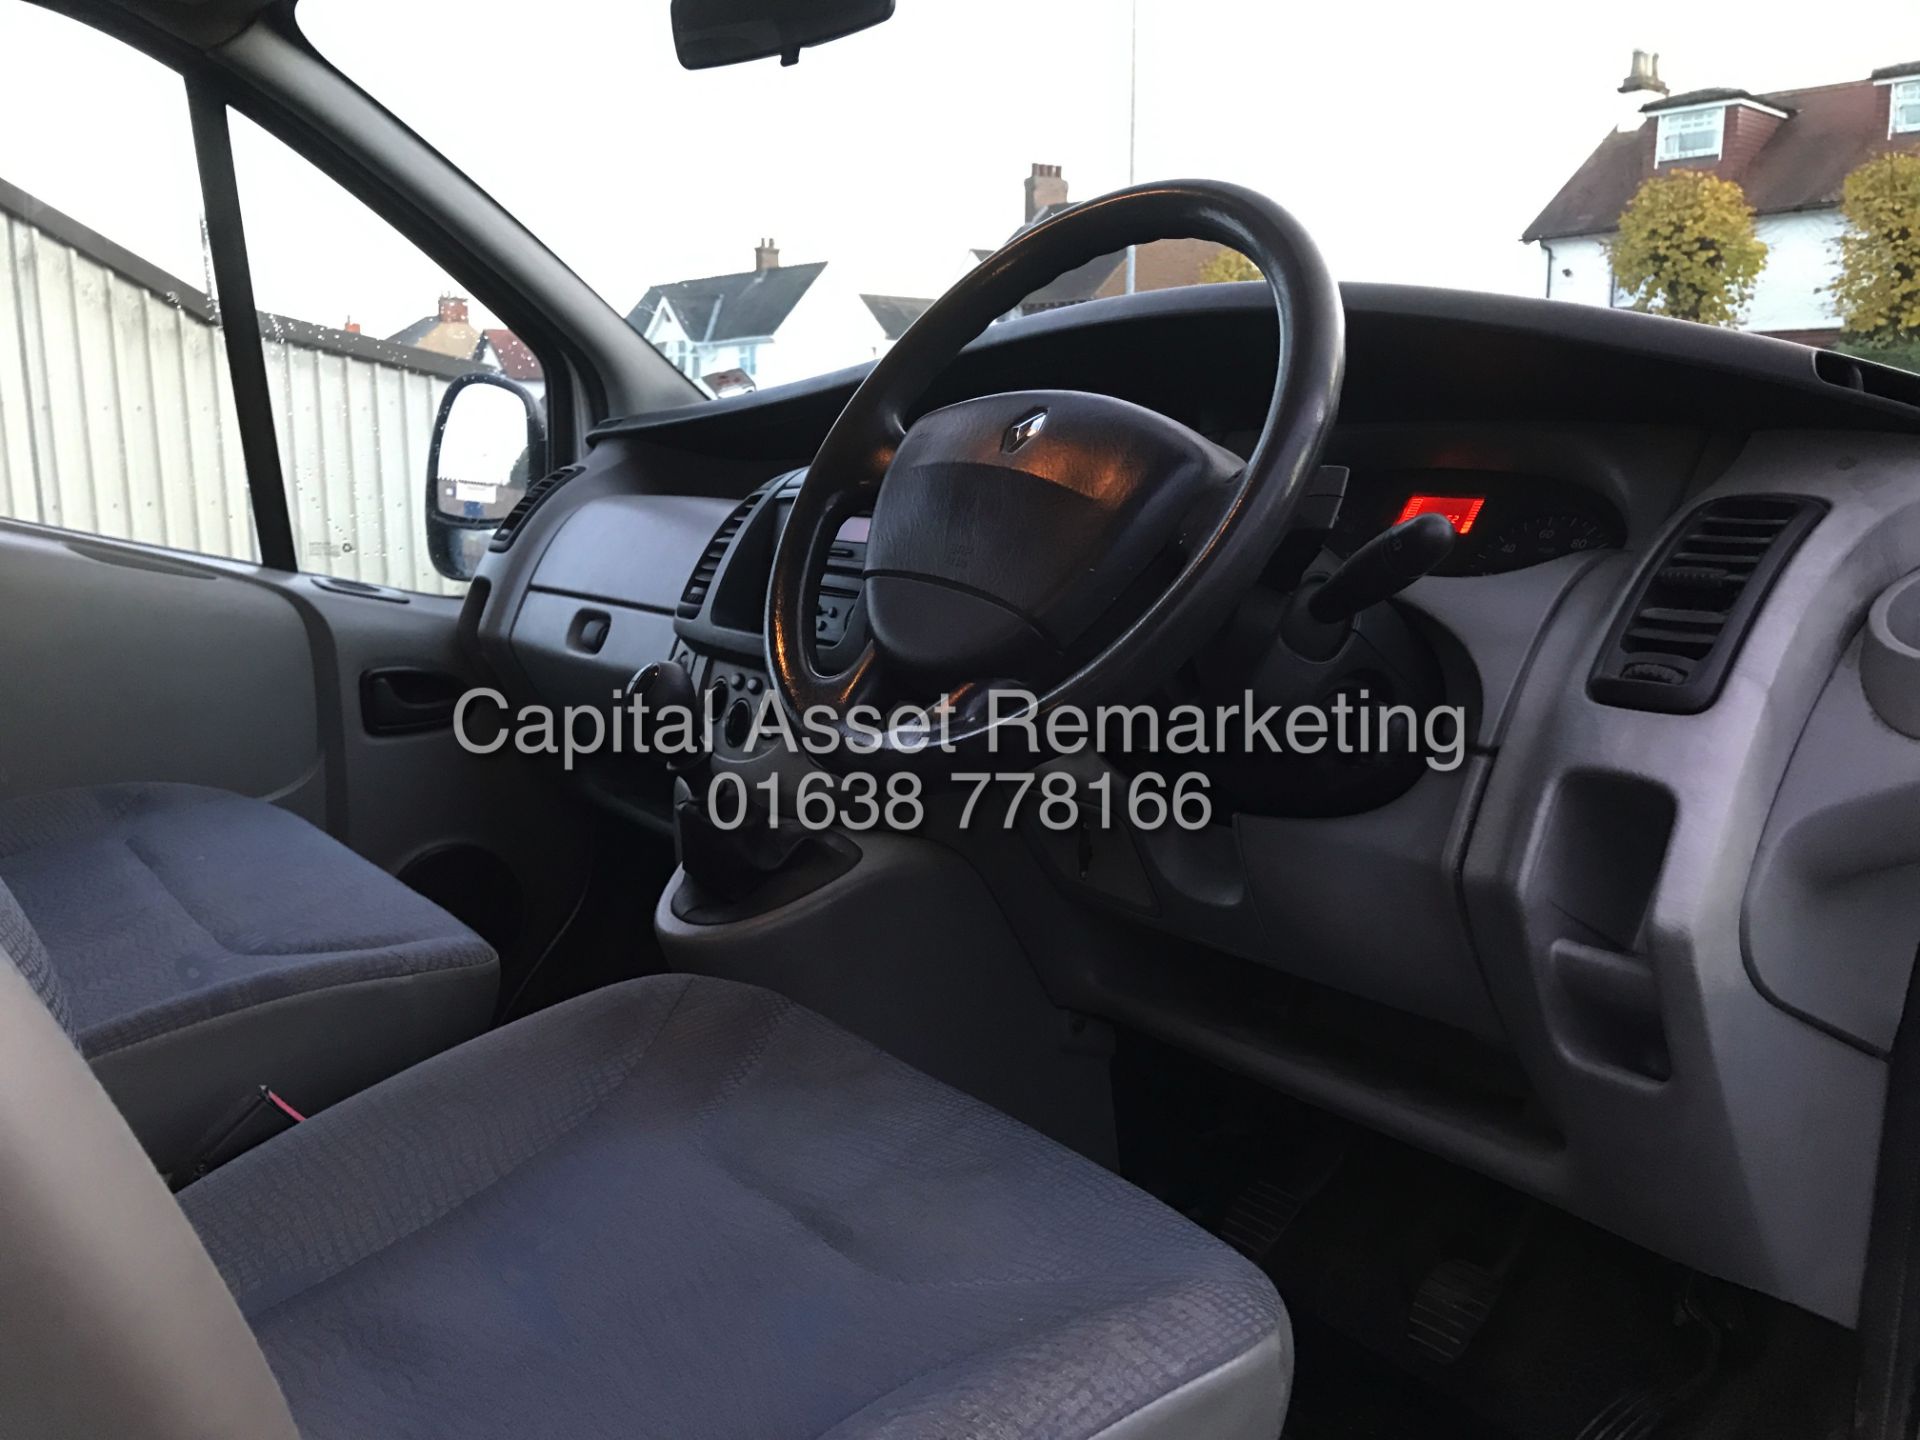 On Sale RENAULT TRAFIC 1.9DCI LONG WHEEL BASE DUELINER 6 SEATER - 05 REG - SILVER - AIR CON - WOW!!! - Image 12 of 19